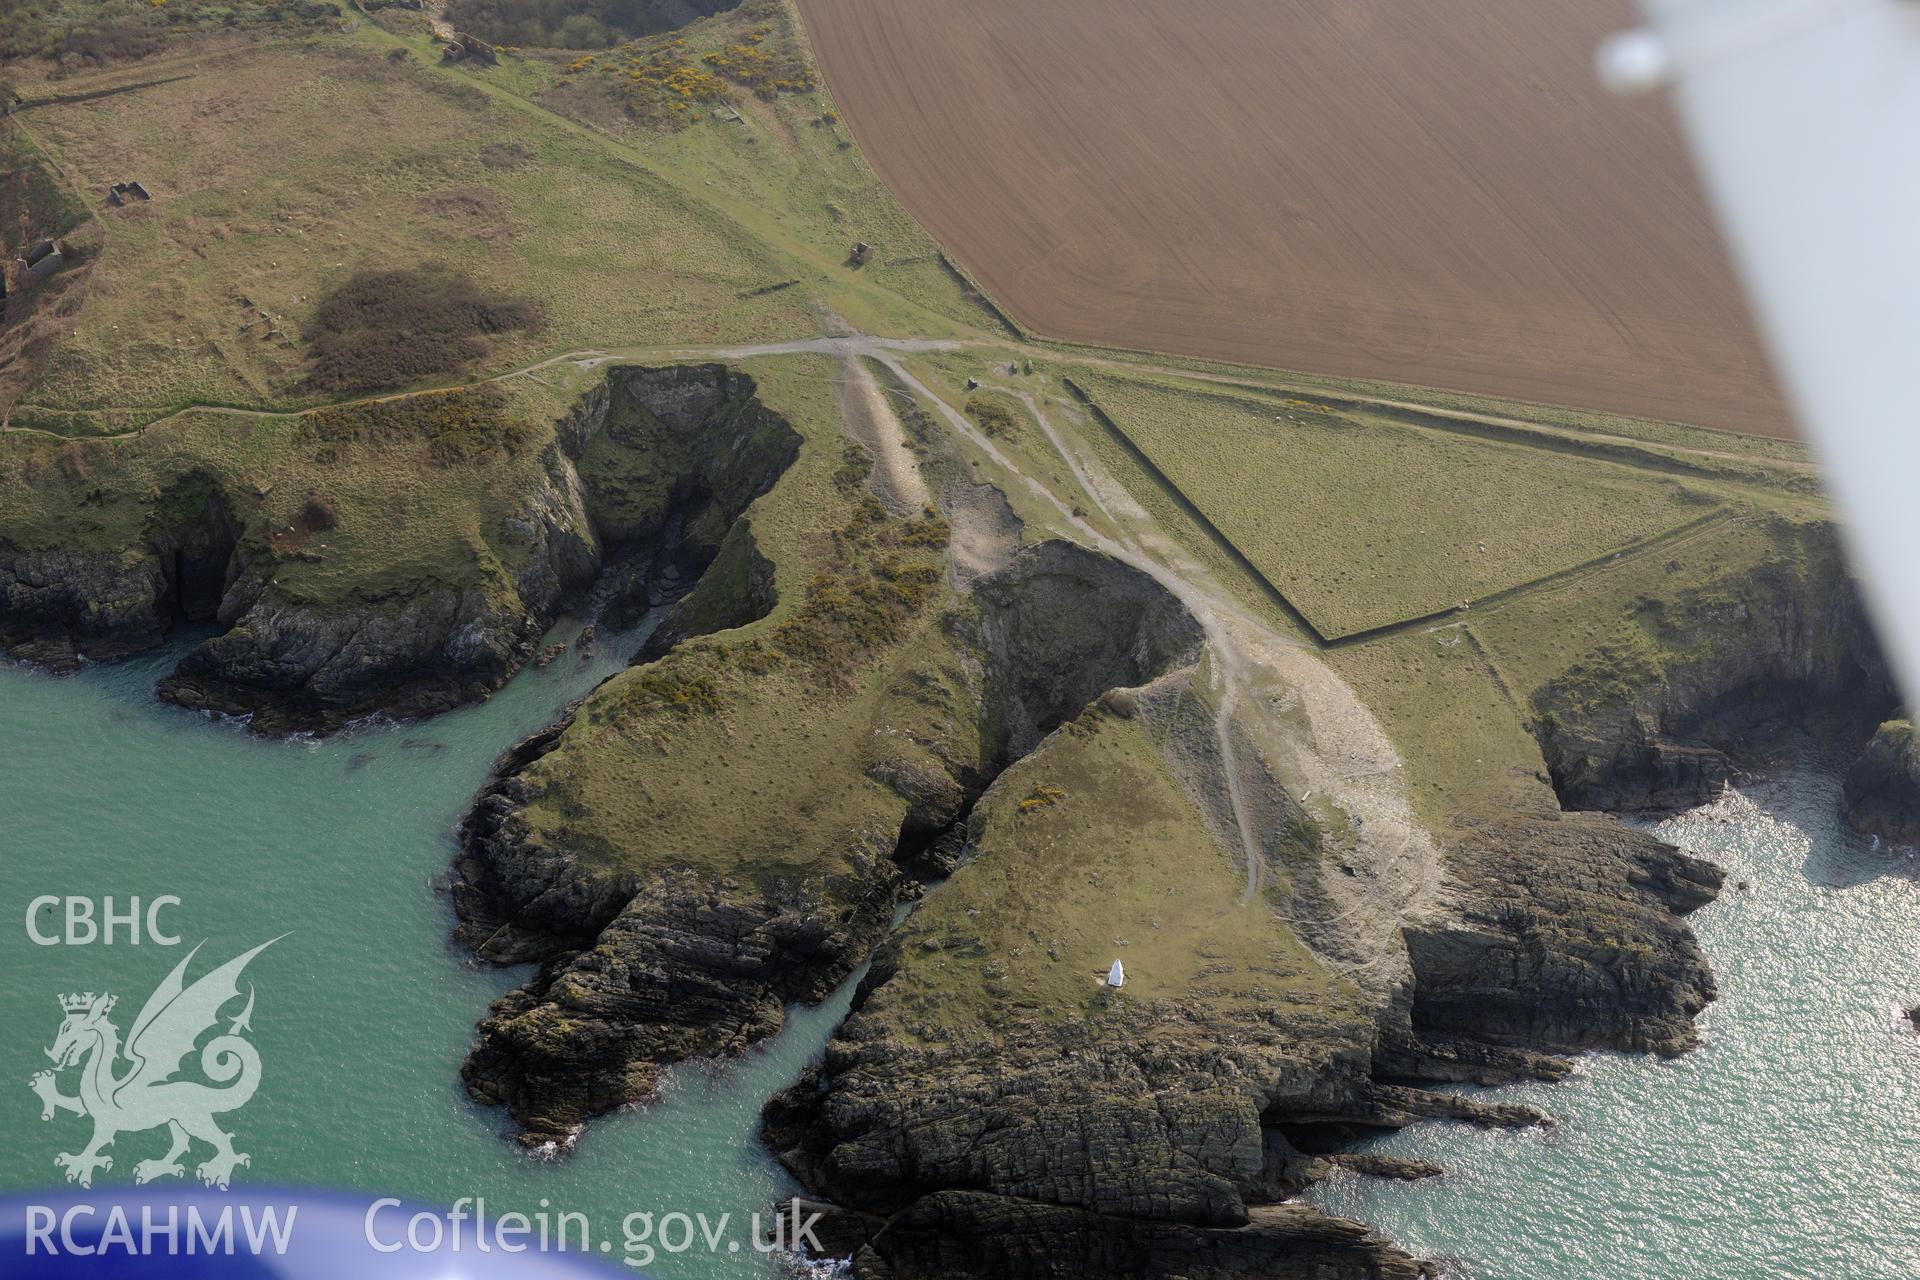 Royal Commission aerial photograph of Porthgain quarries taken on 27th March 2017. Baseline aerial reconnaissance survey for the CHERISH Project. ? Crown: CHERISH PROJECT 2017. Produced with EU funds through the Ireland Wales Co-operation Programme 2014-2020. All material made freely available through the Open Government Licence.